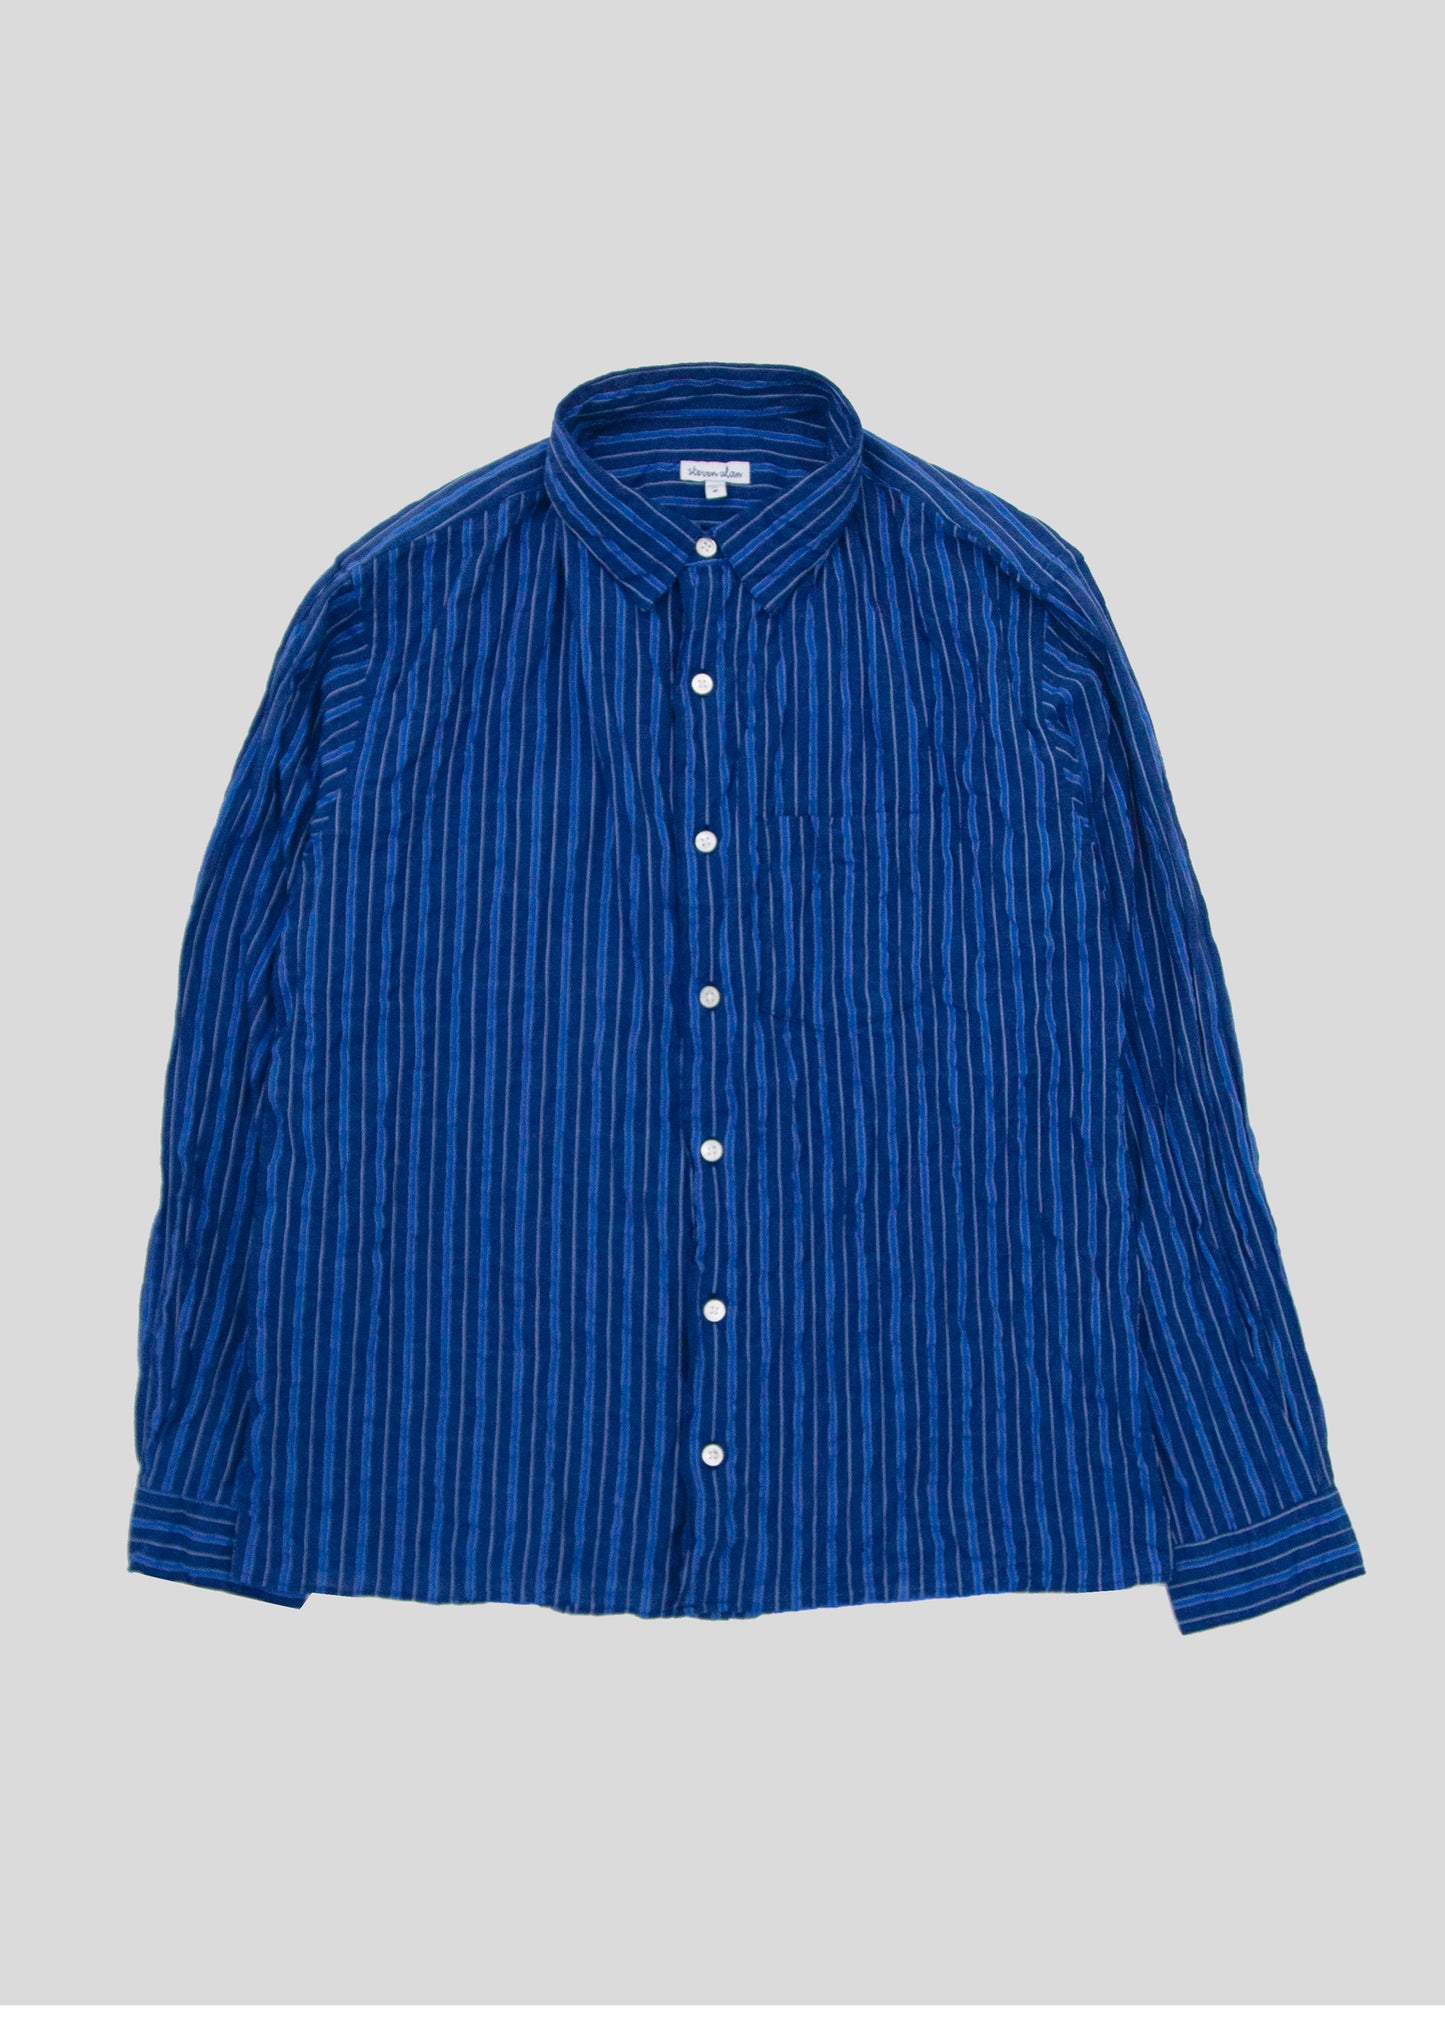 Front flat lay of notch shirt in color dark blue stripe